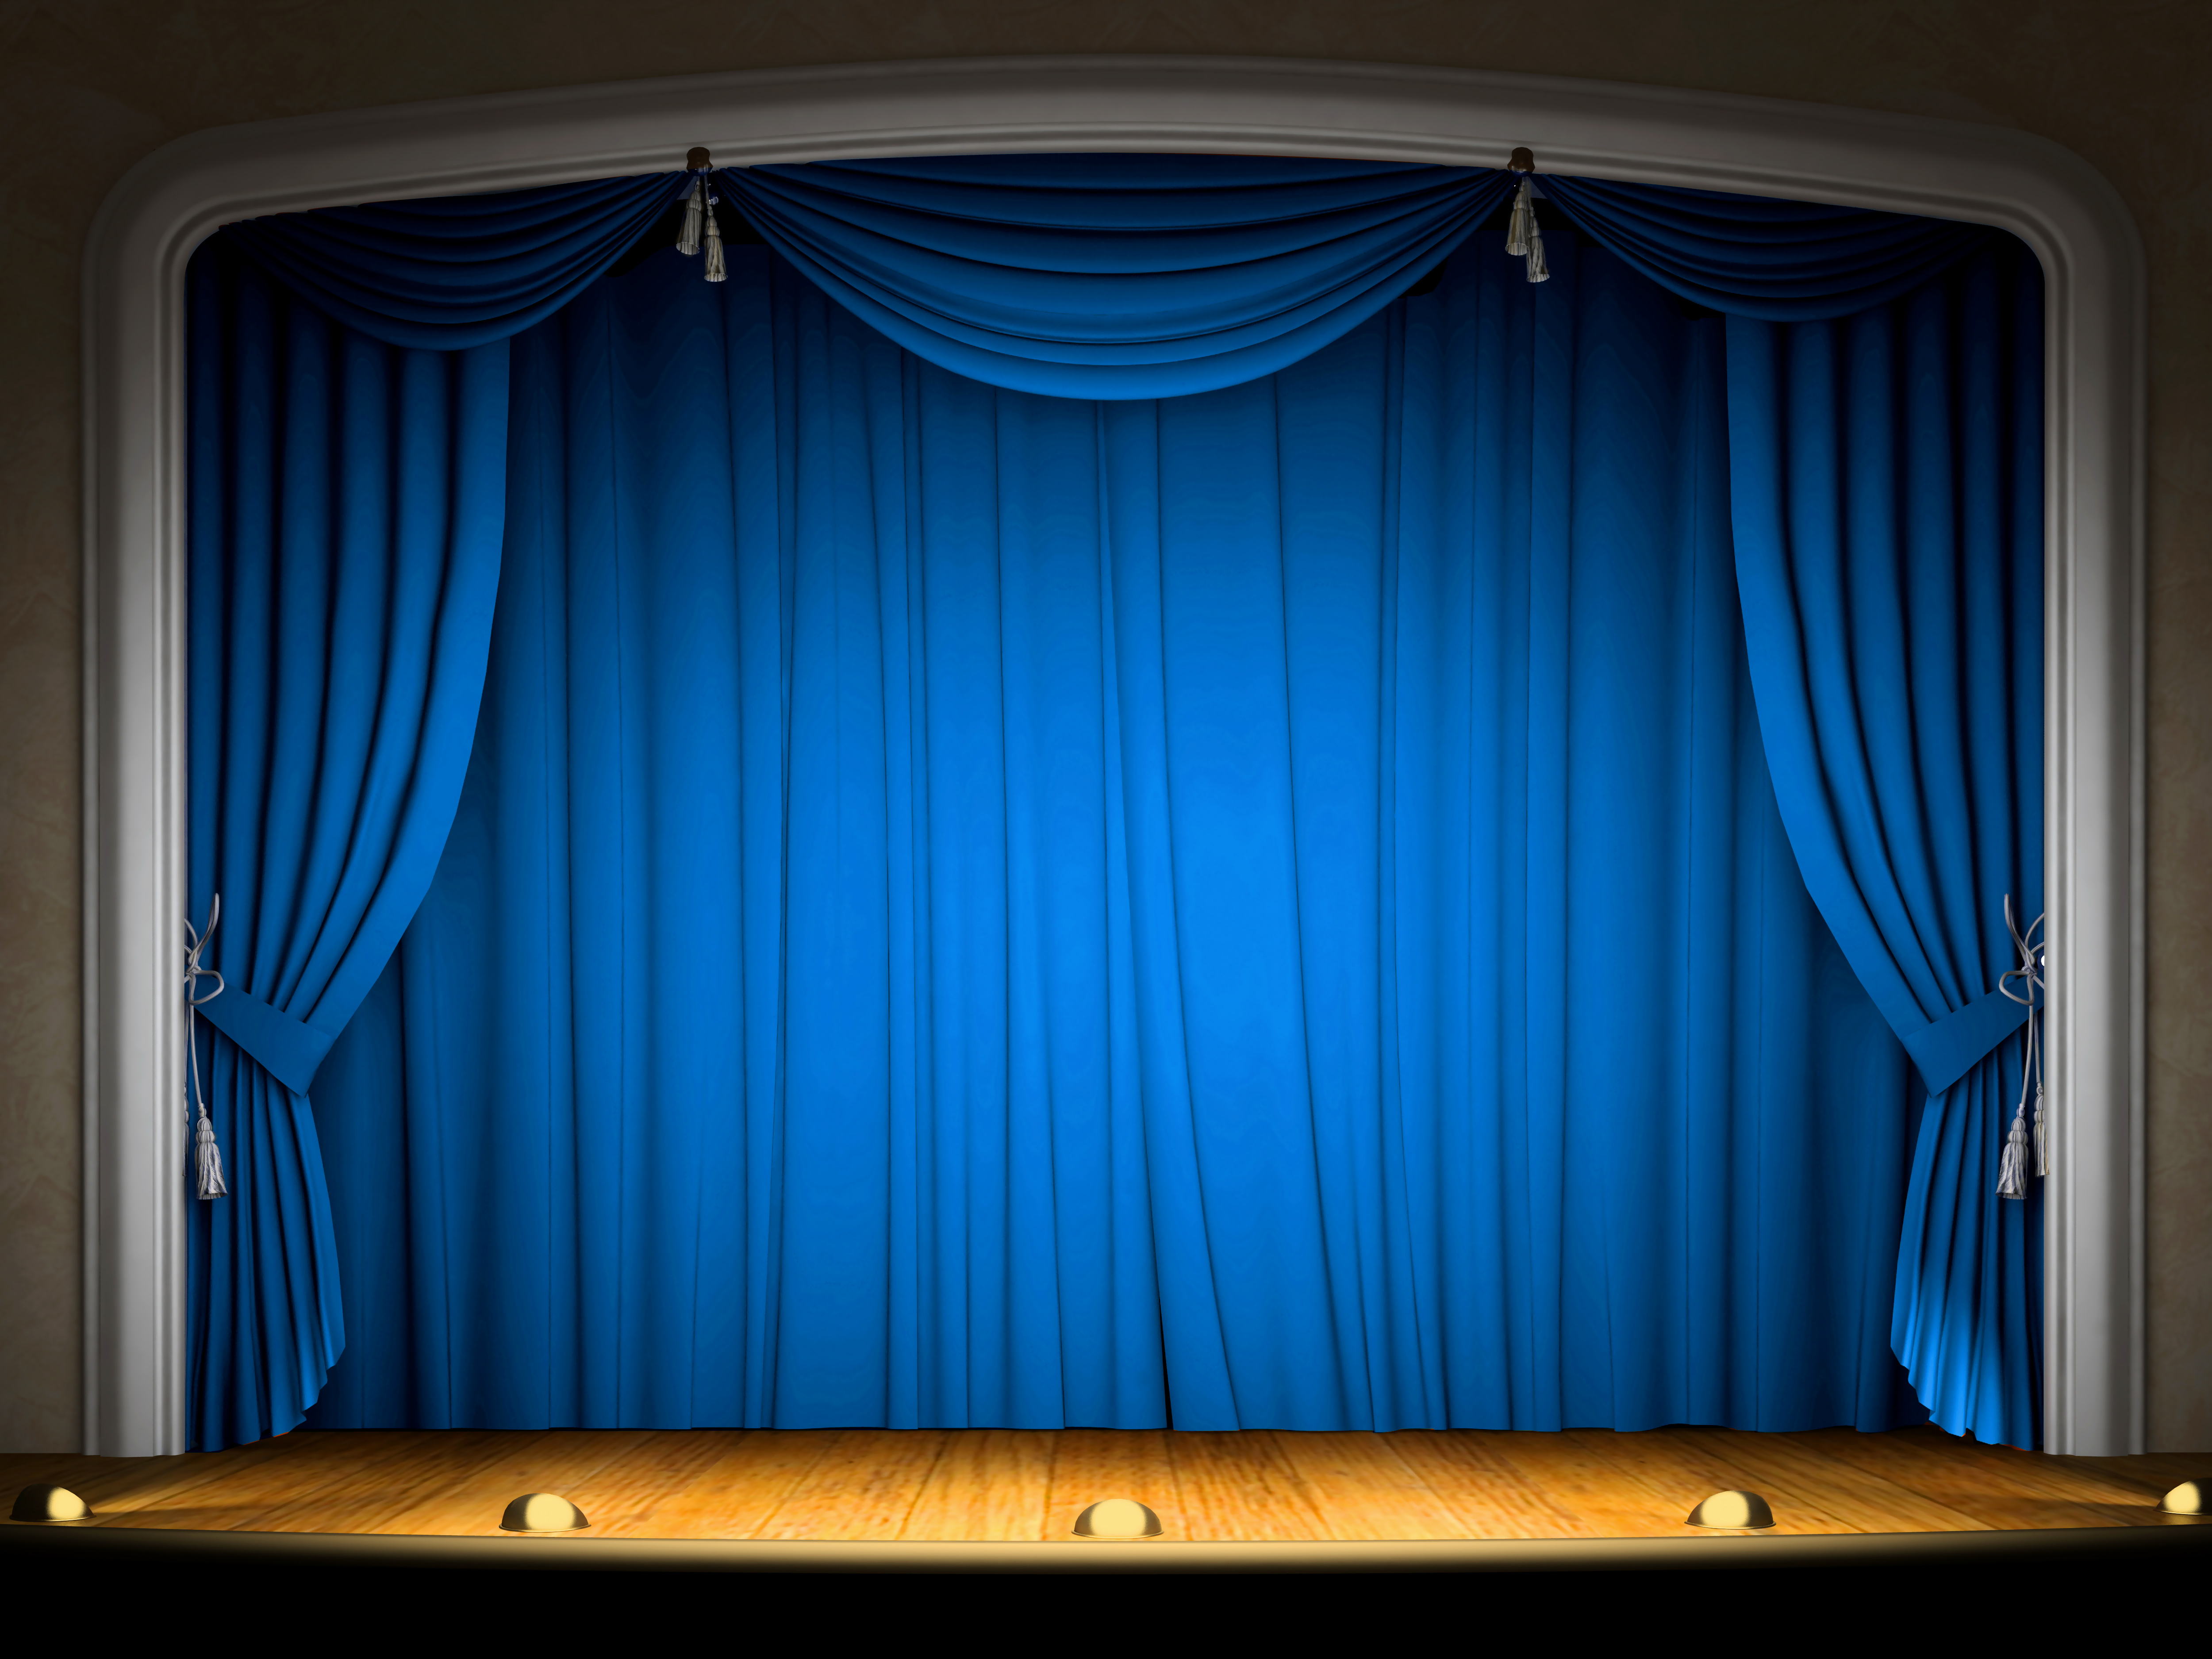 This Jpeg Image - Blue Stage Curtains Background - HD Wallpaper 